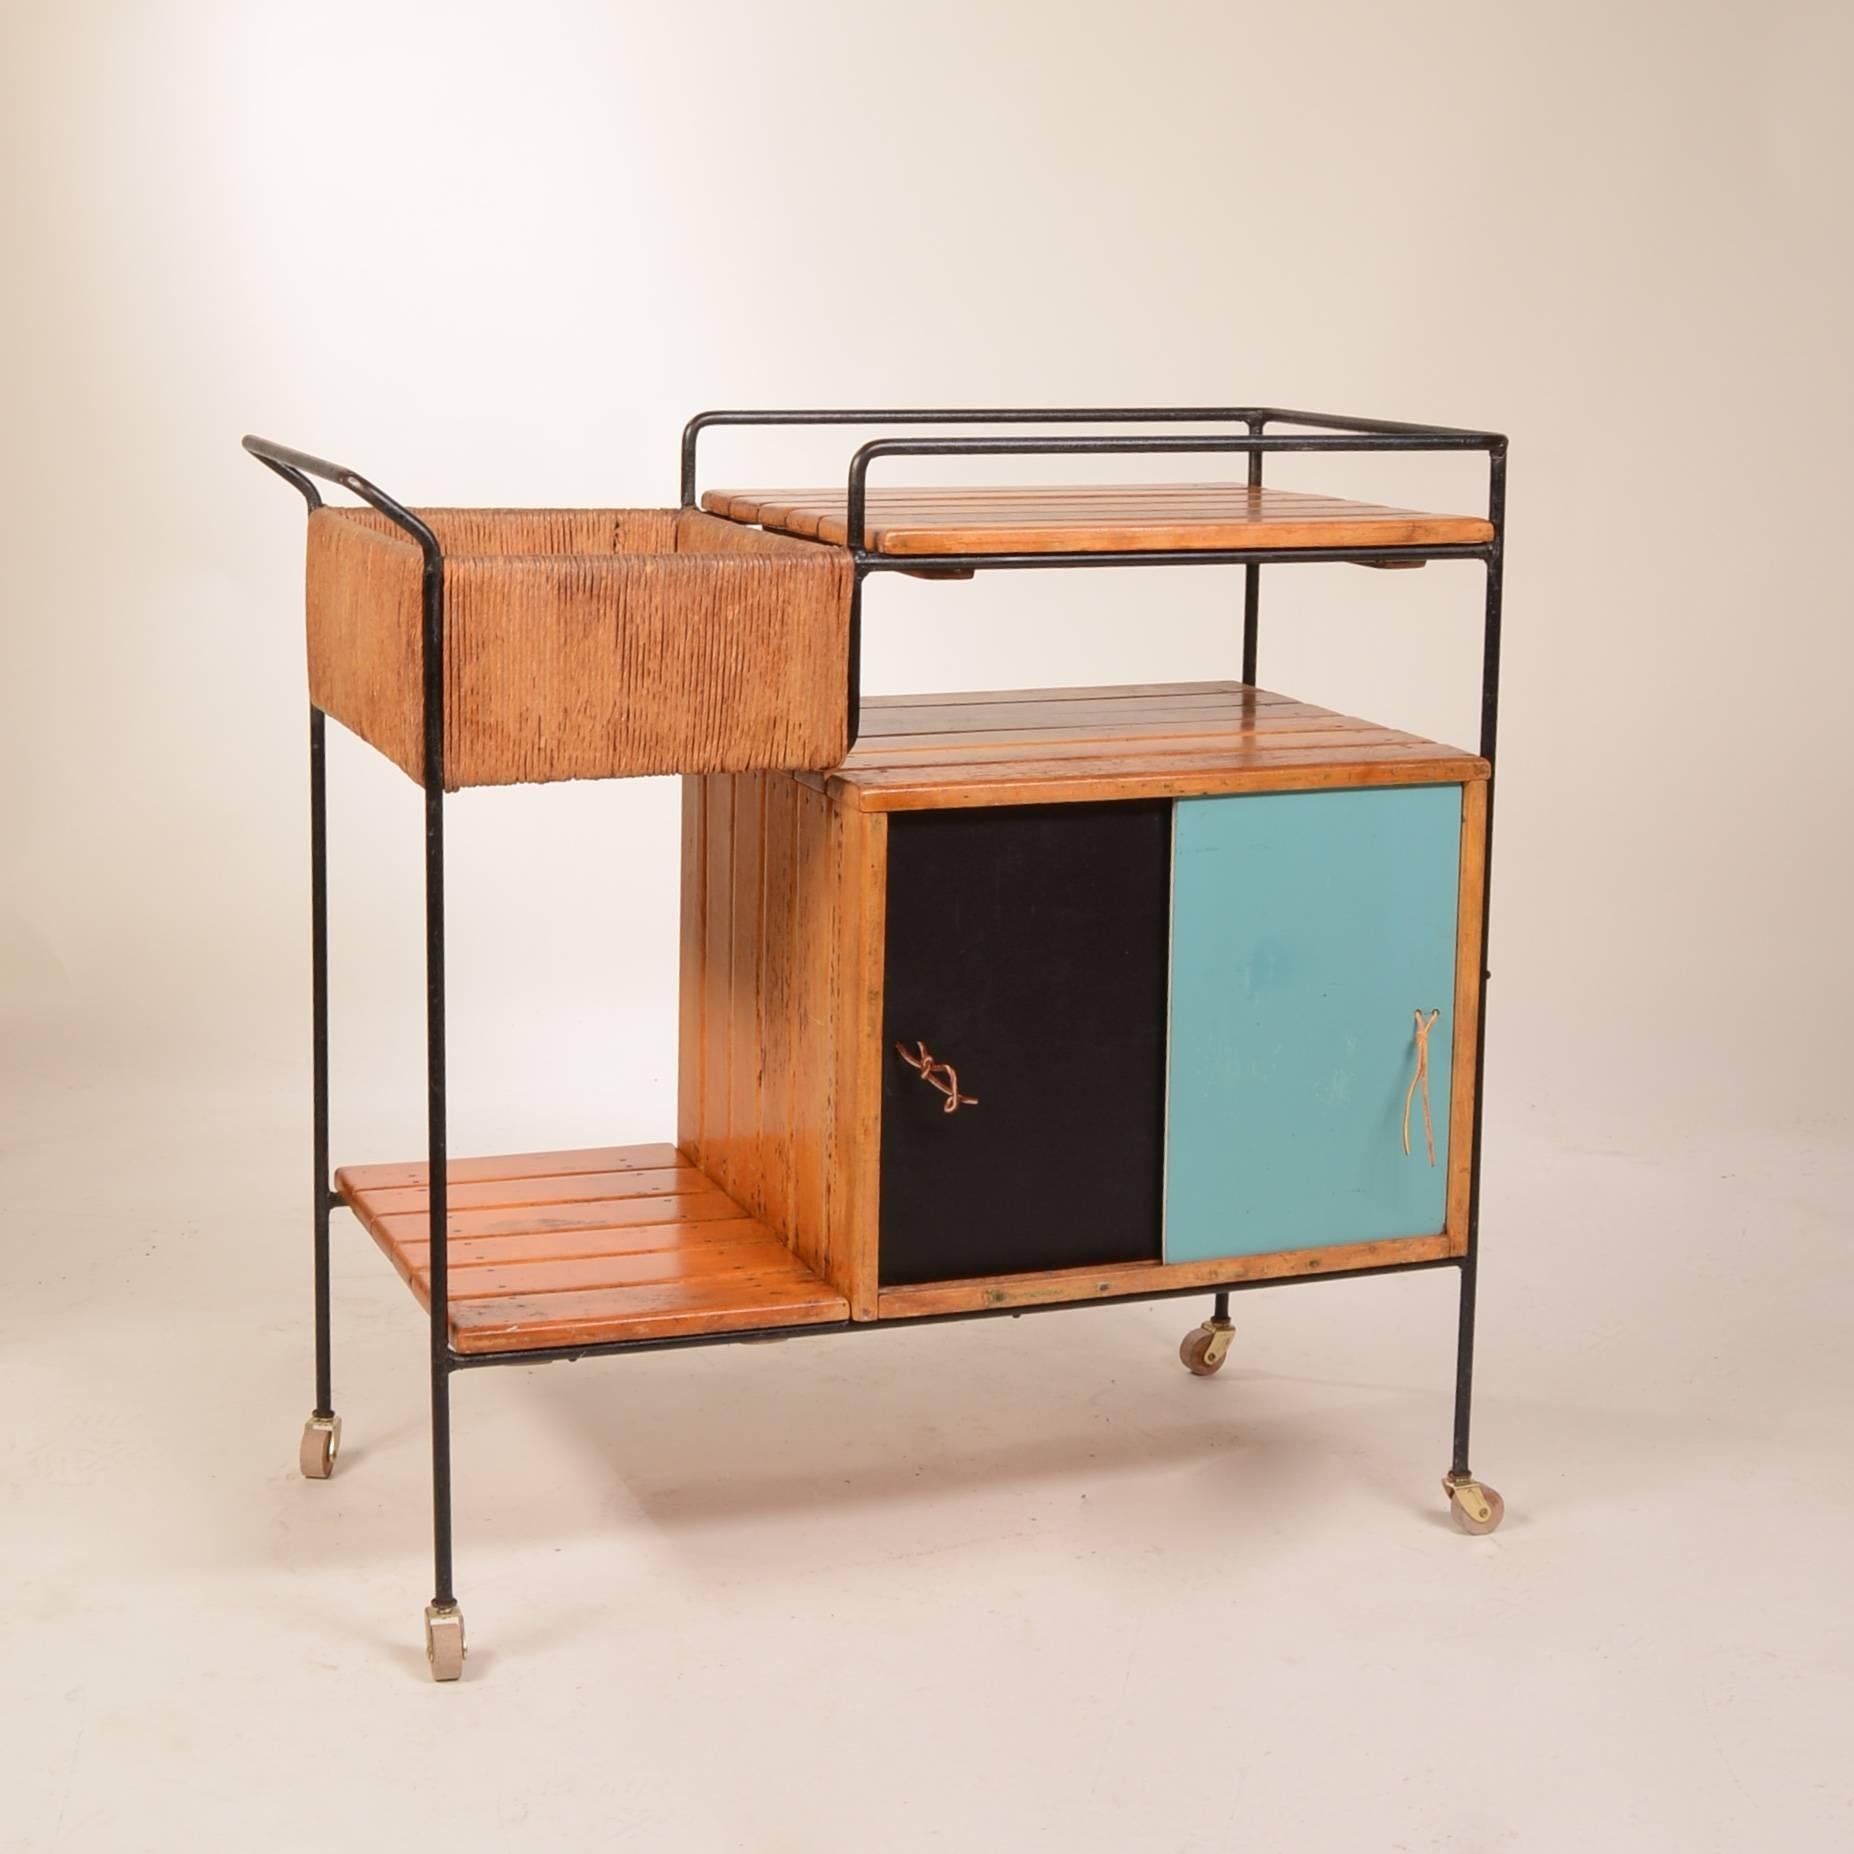 Beautiful, modern bar cart by Arthur Umanoff. Features multi-material construction, including wood, iron and rush trim. Wonderful painted doors with leather pulls, this piece is out of this world!
 